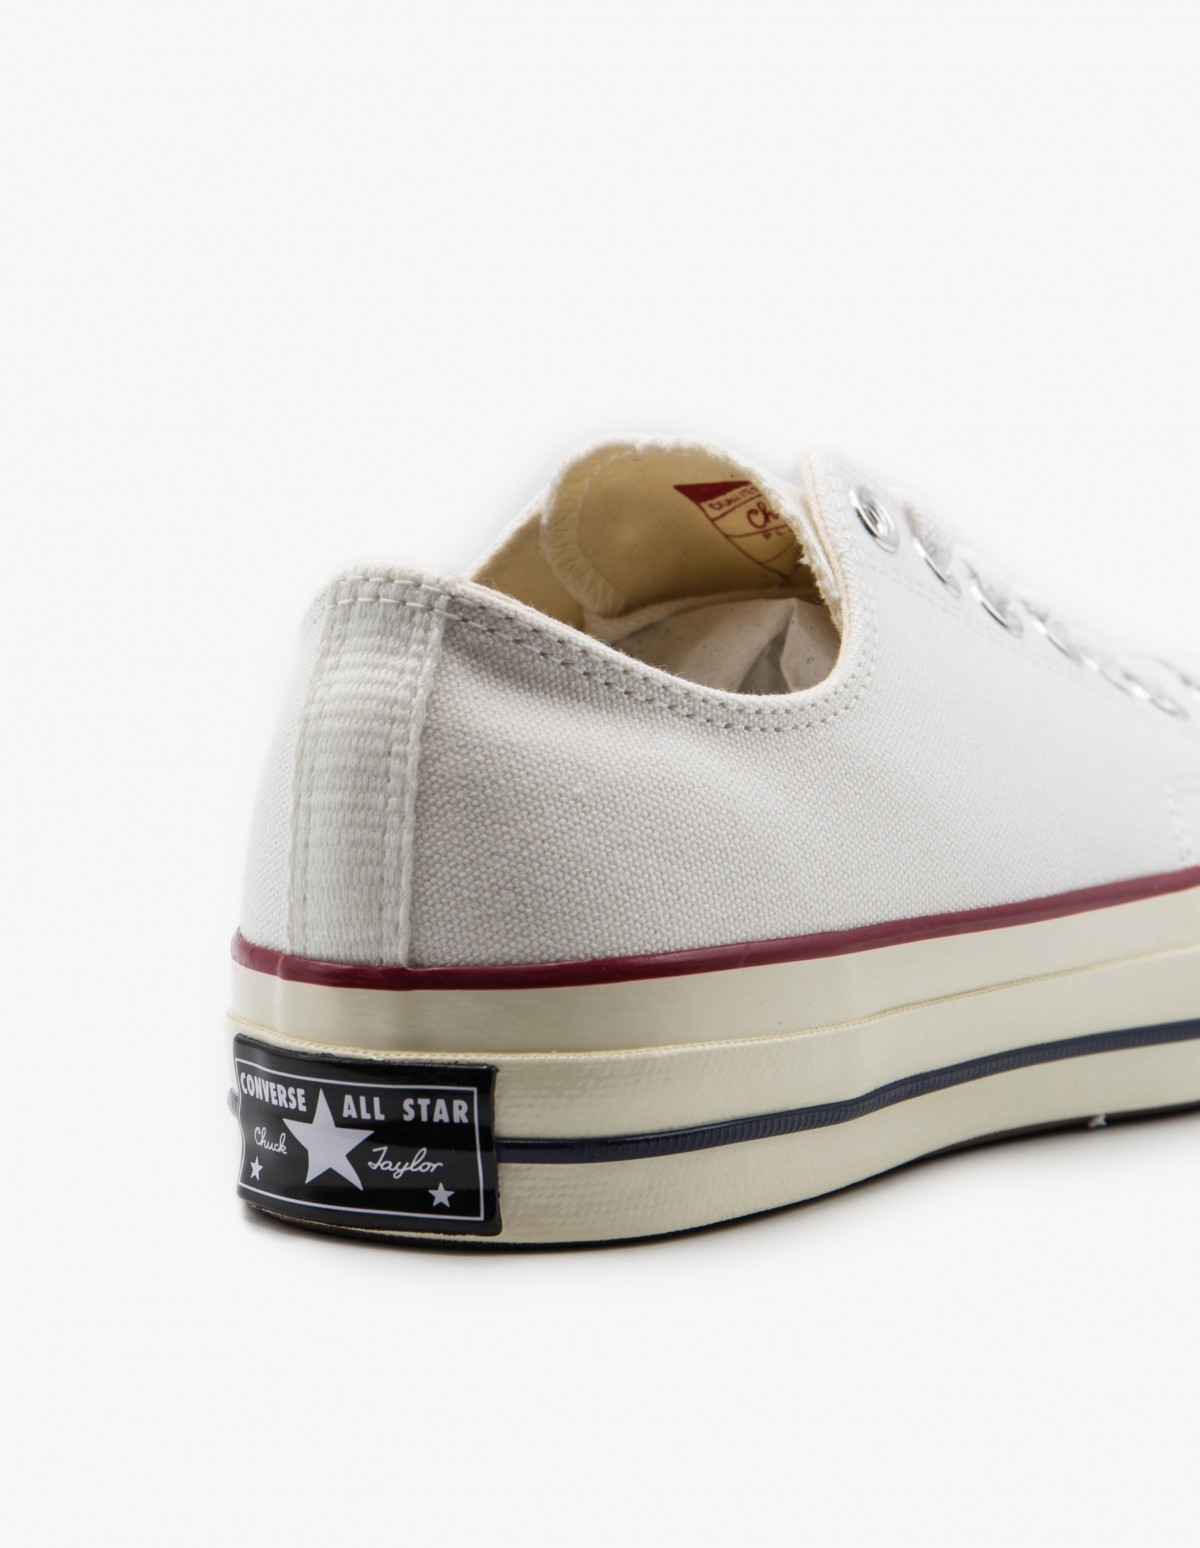 Converse Chuck Taylor Low OX All Star '70 in White